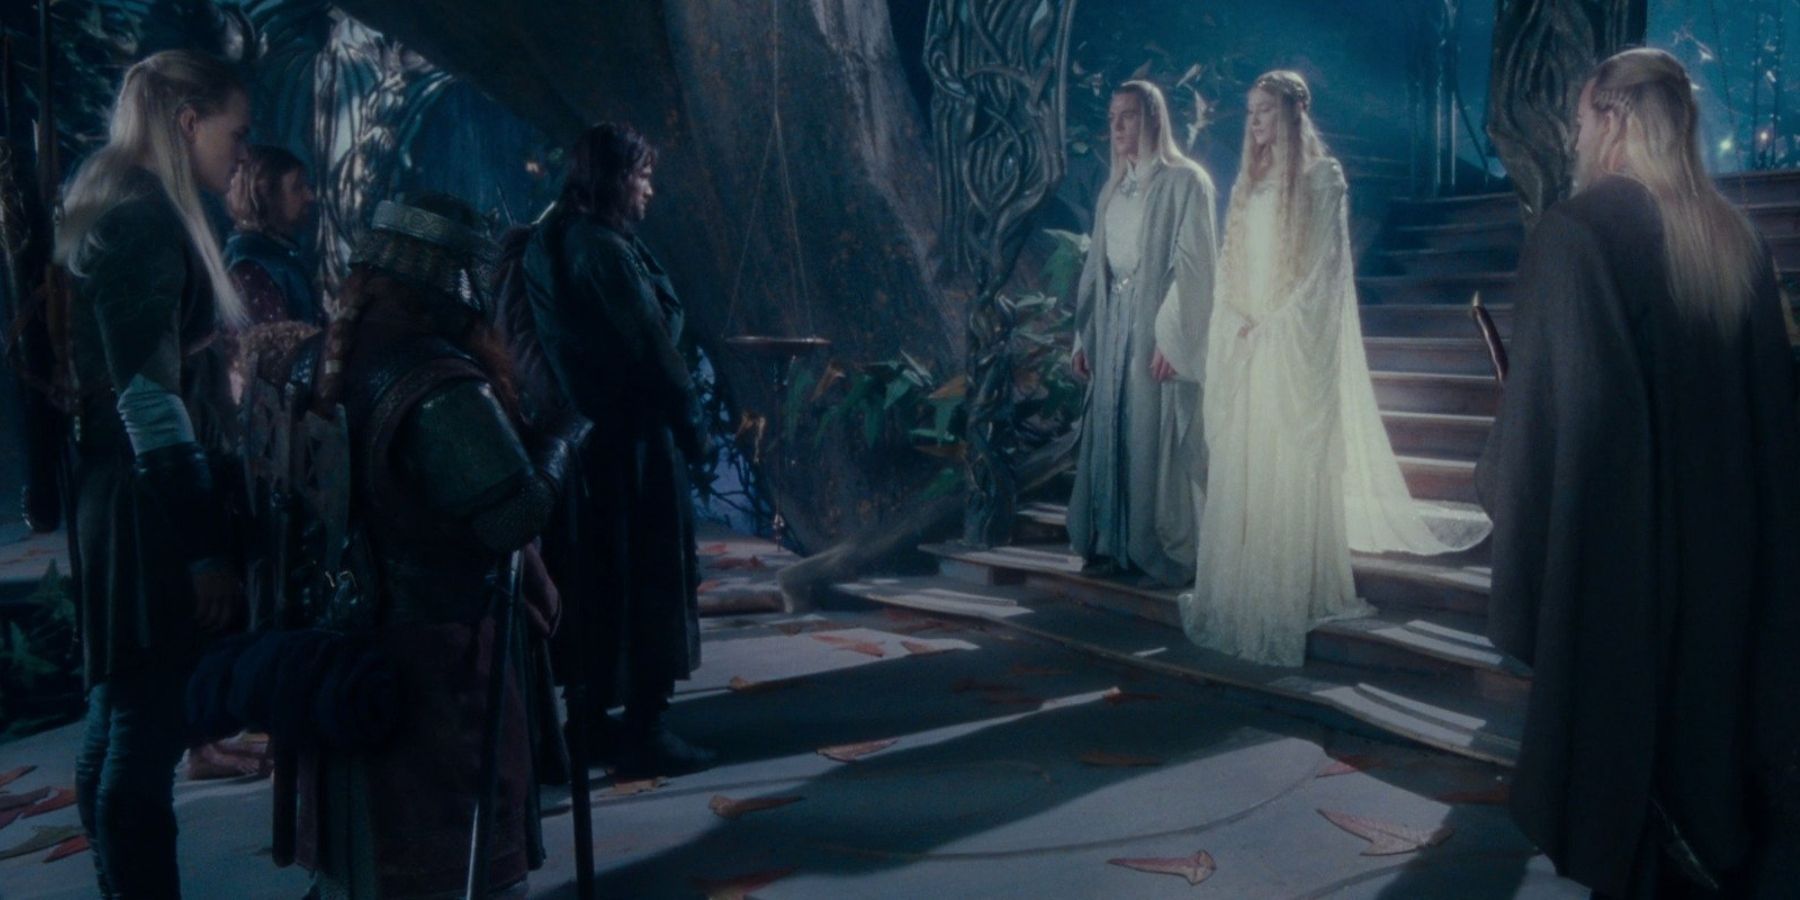 Meeting the Galadriel